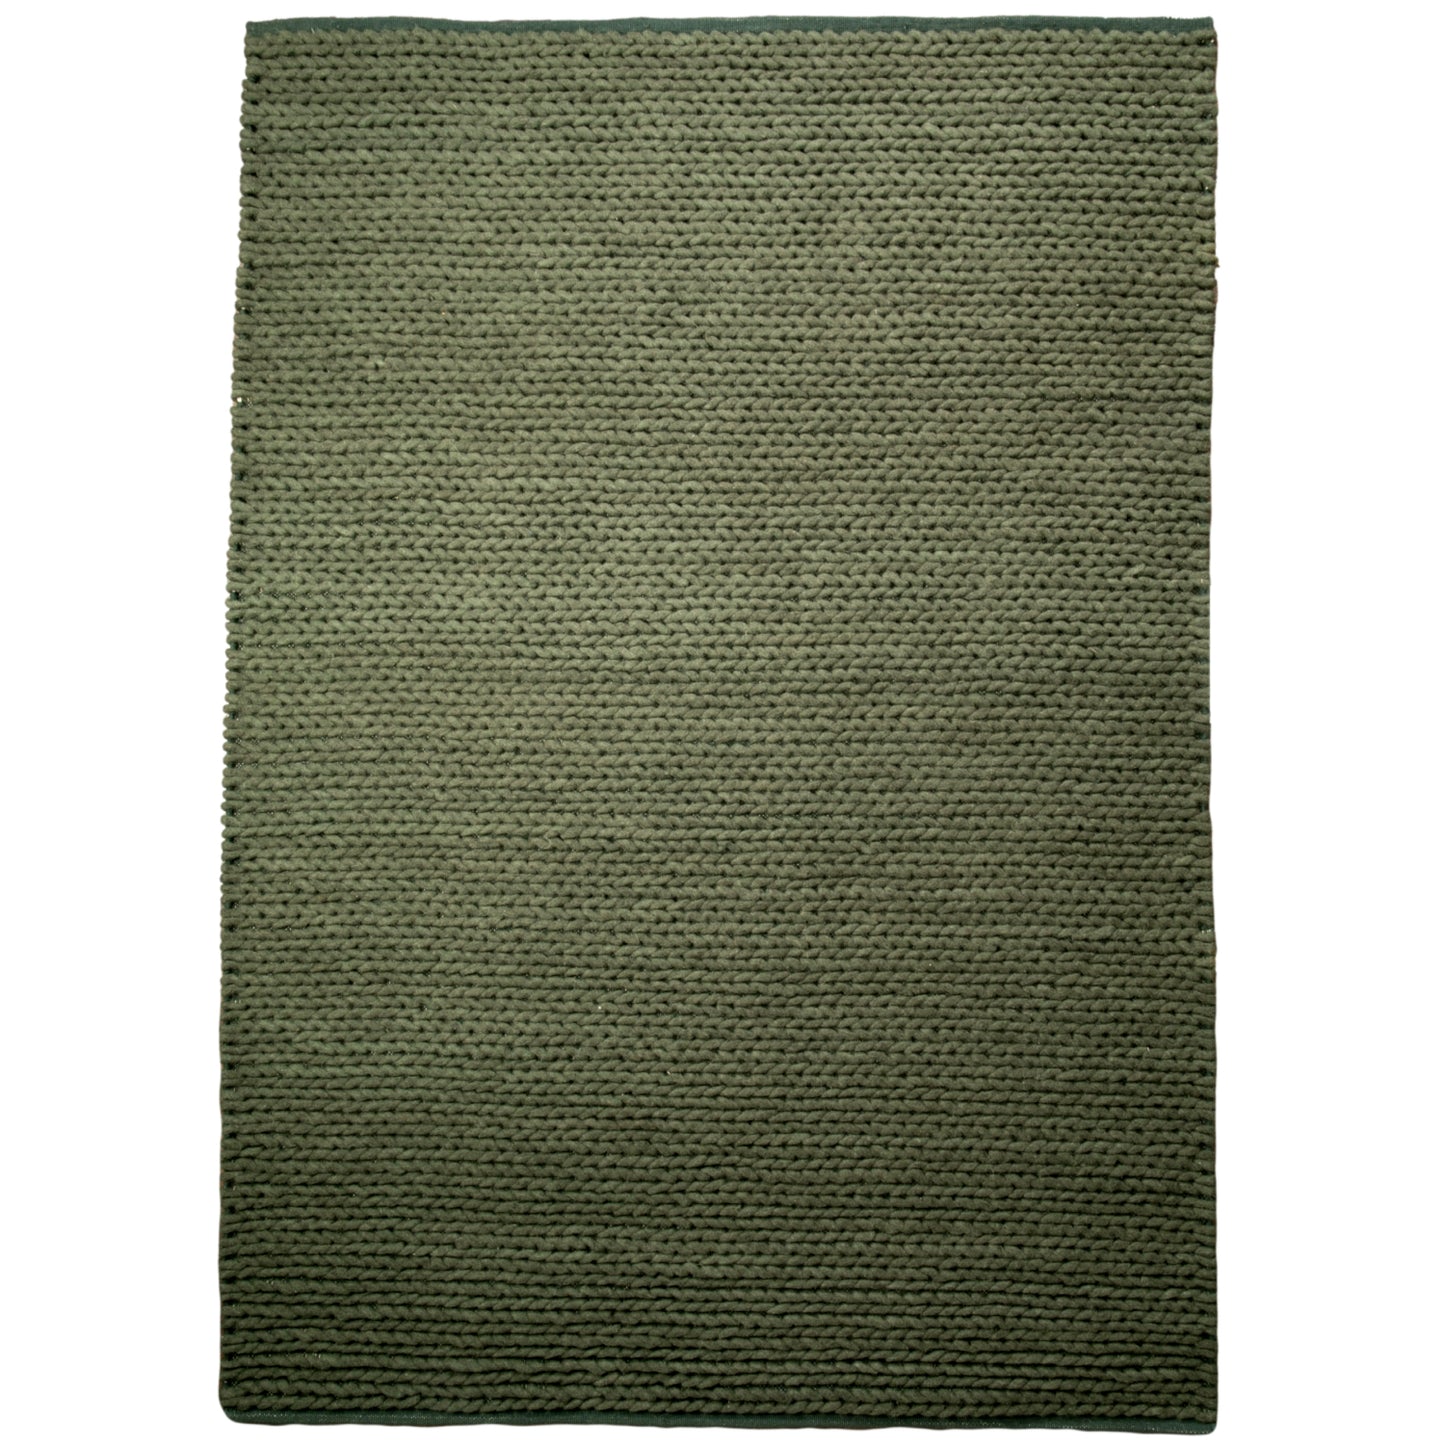 Green knitted wool rug by Native